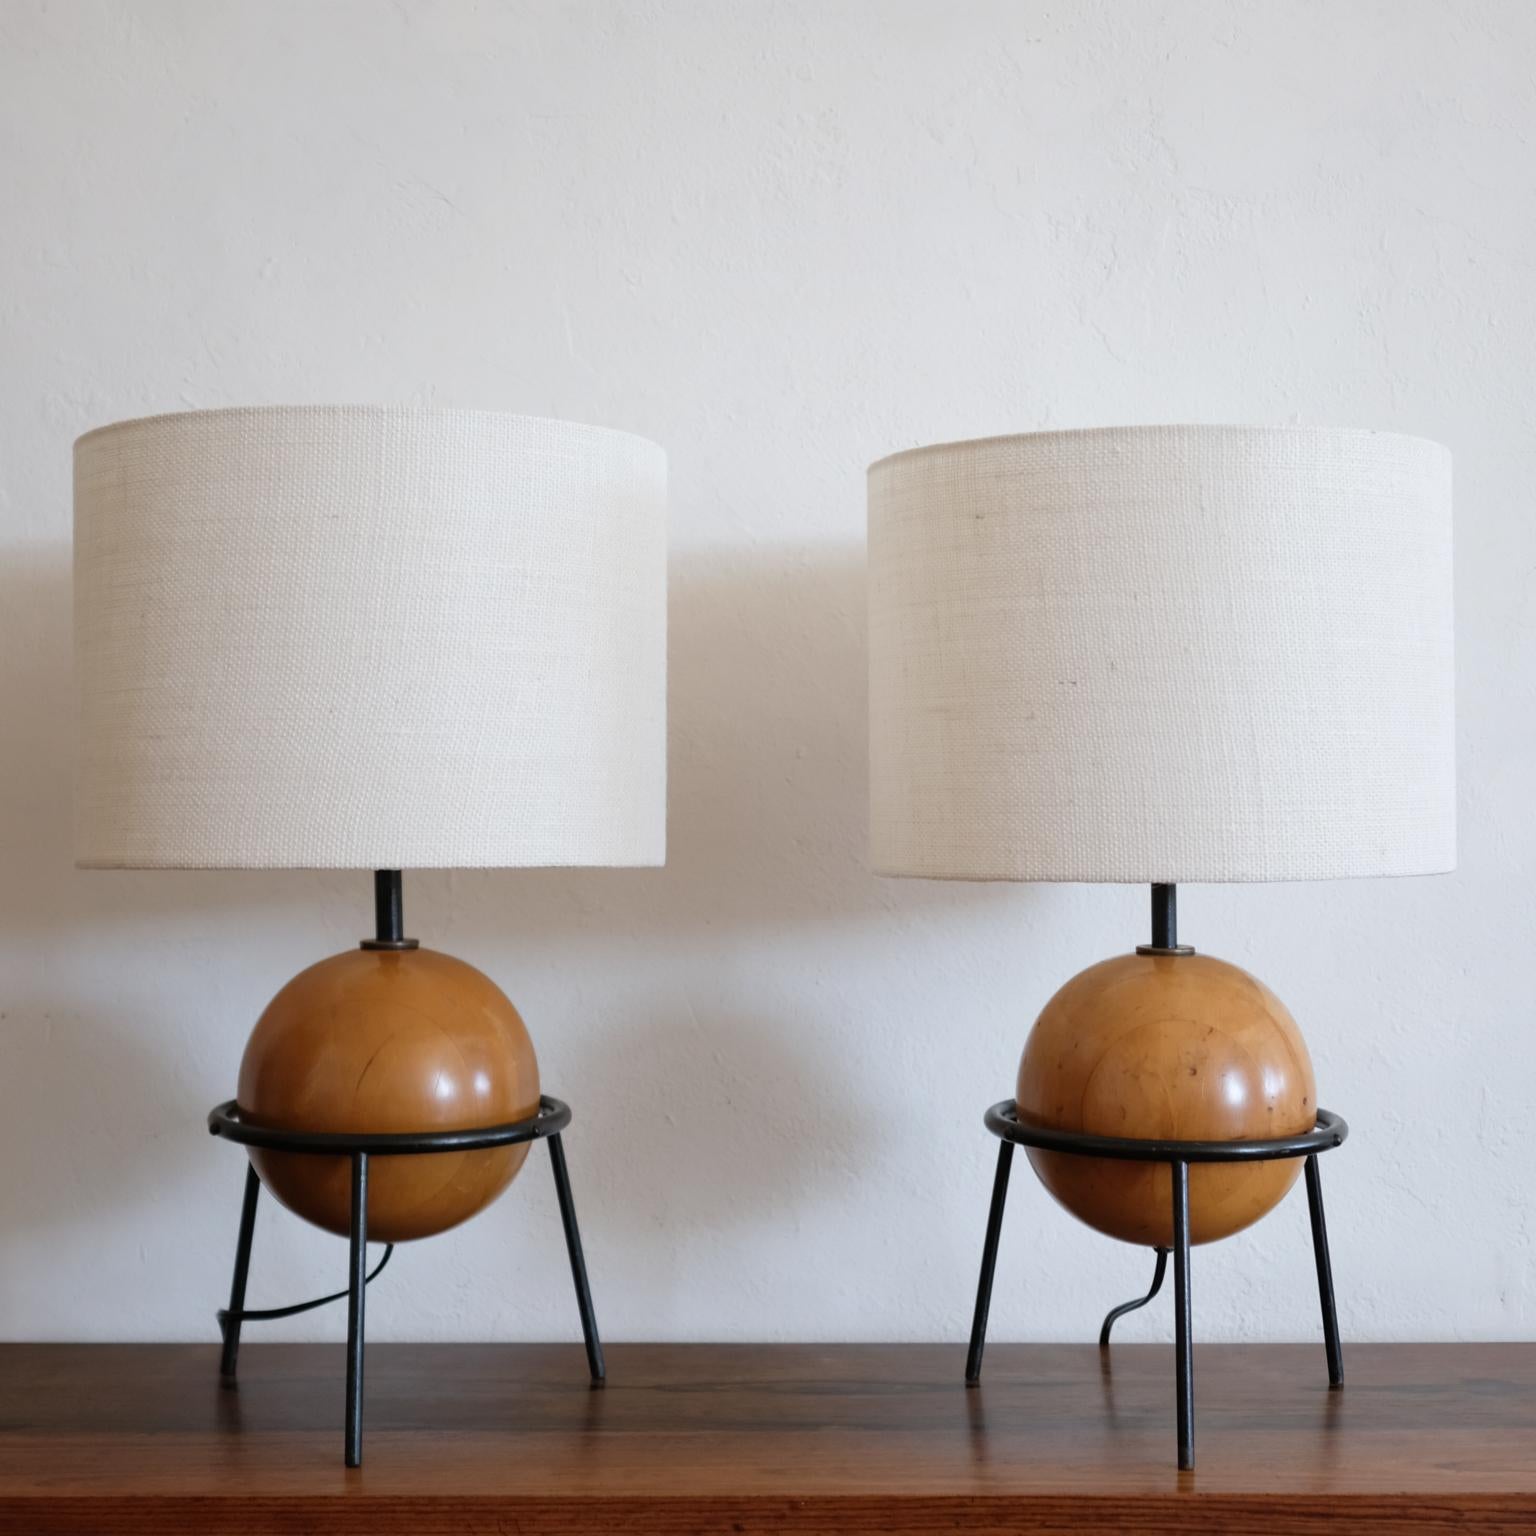 A pair of lamps by California designer, Albert Blake. Like many designers of the period, he moved from the Midwest to California after serving in the Army during WWII. He worked as a scene designer, then moved into full-time furniture design and